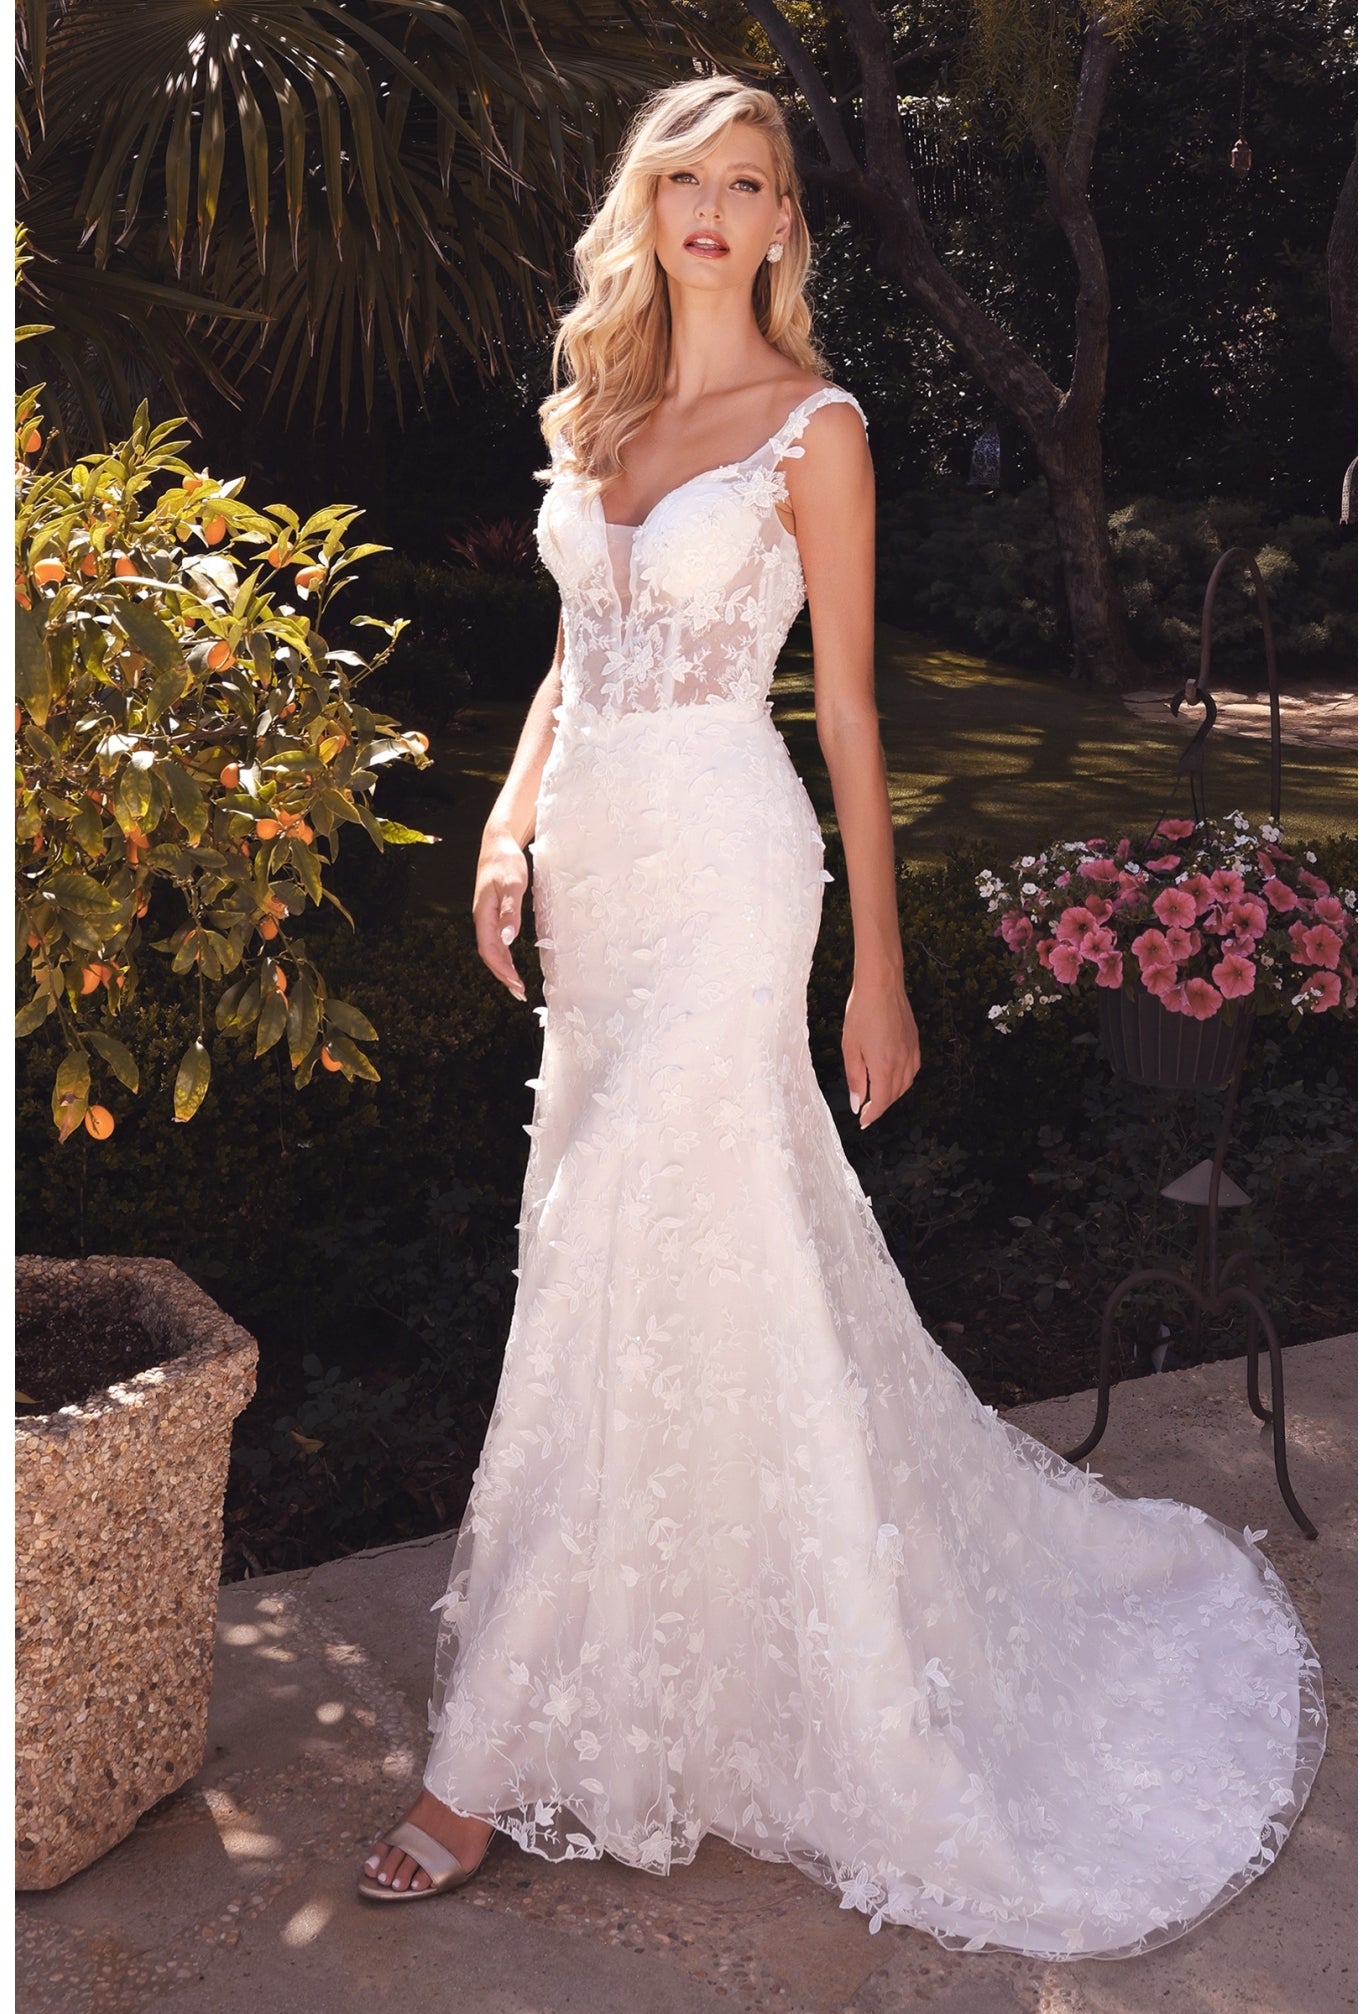  Floral Lace Wedding Dress Bridal Gowns Mermaid Style